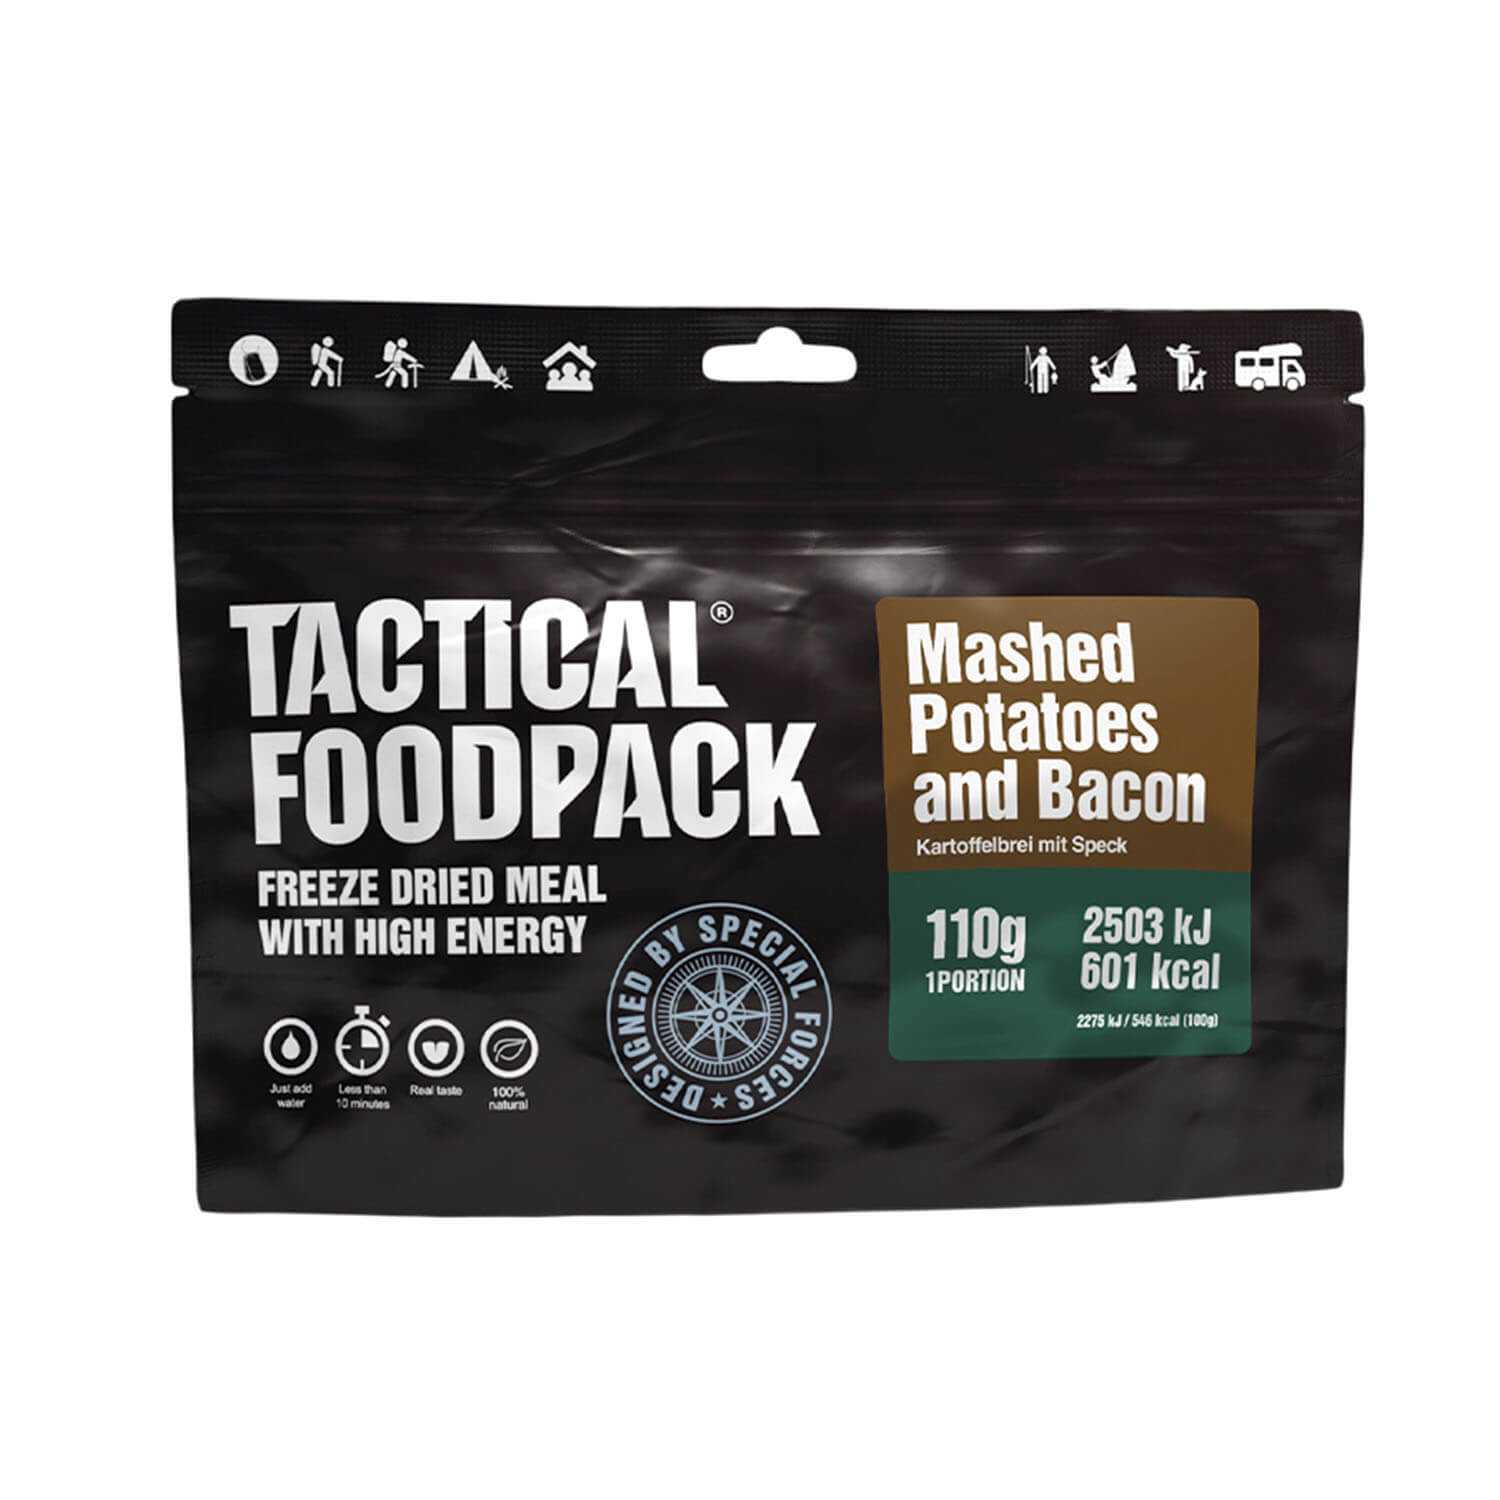 Tactical Foodpack Mashed Potato and Bacon